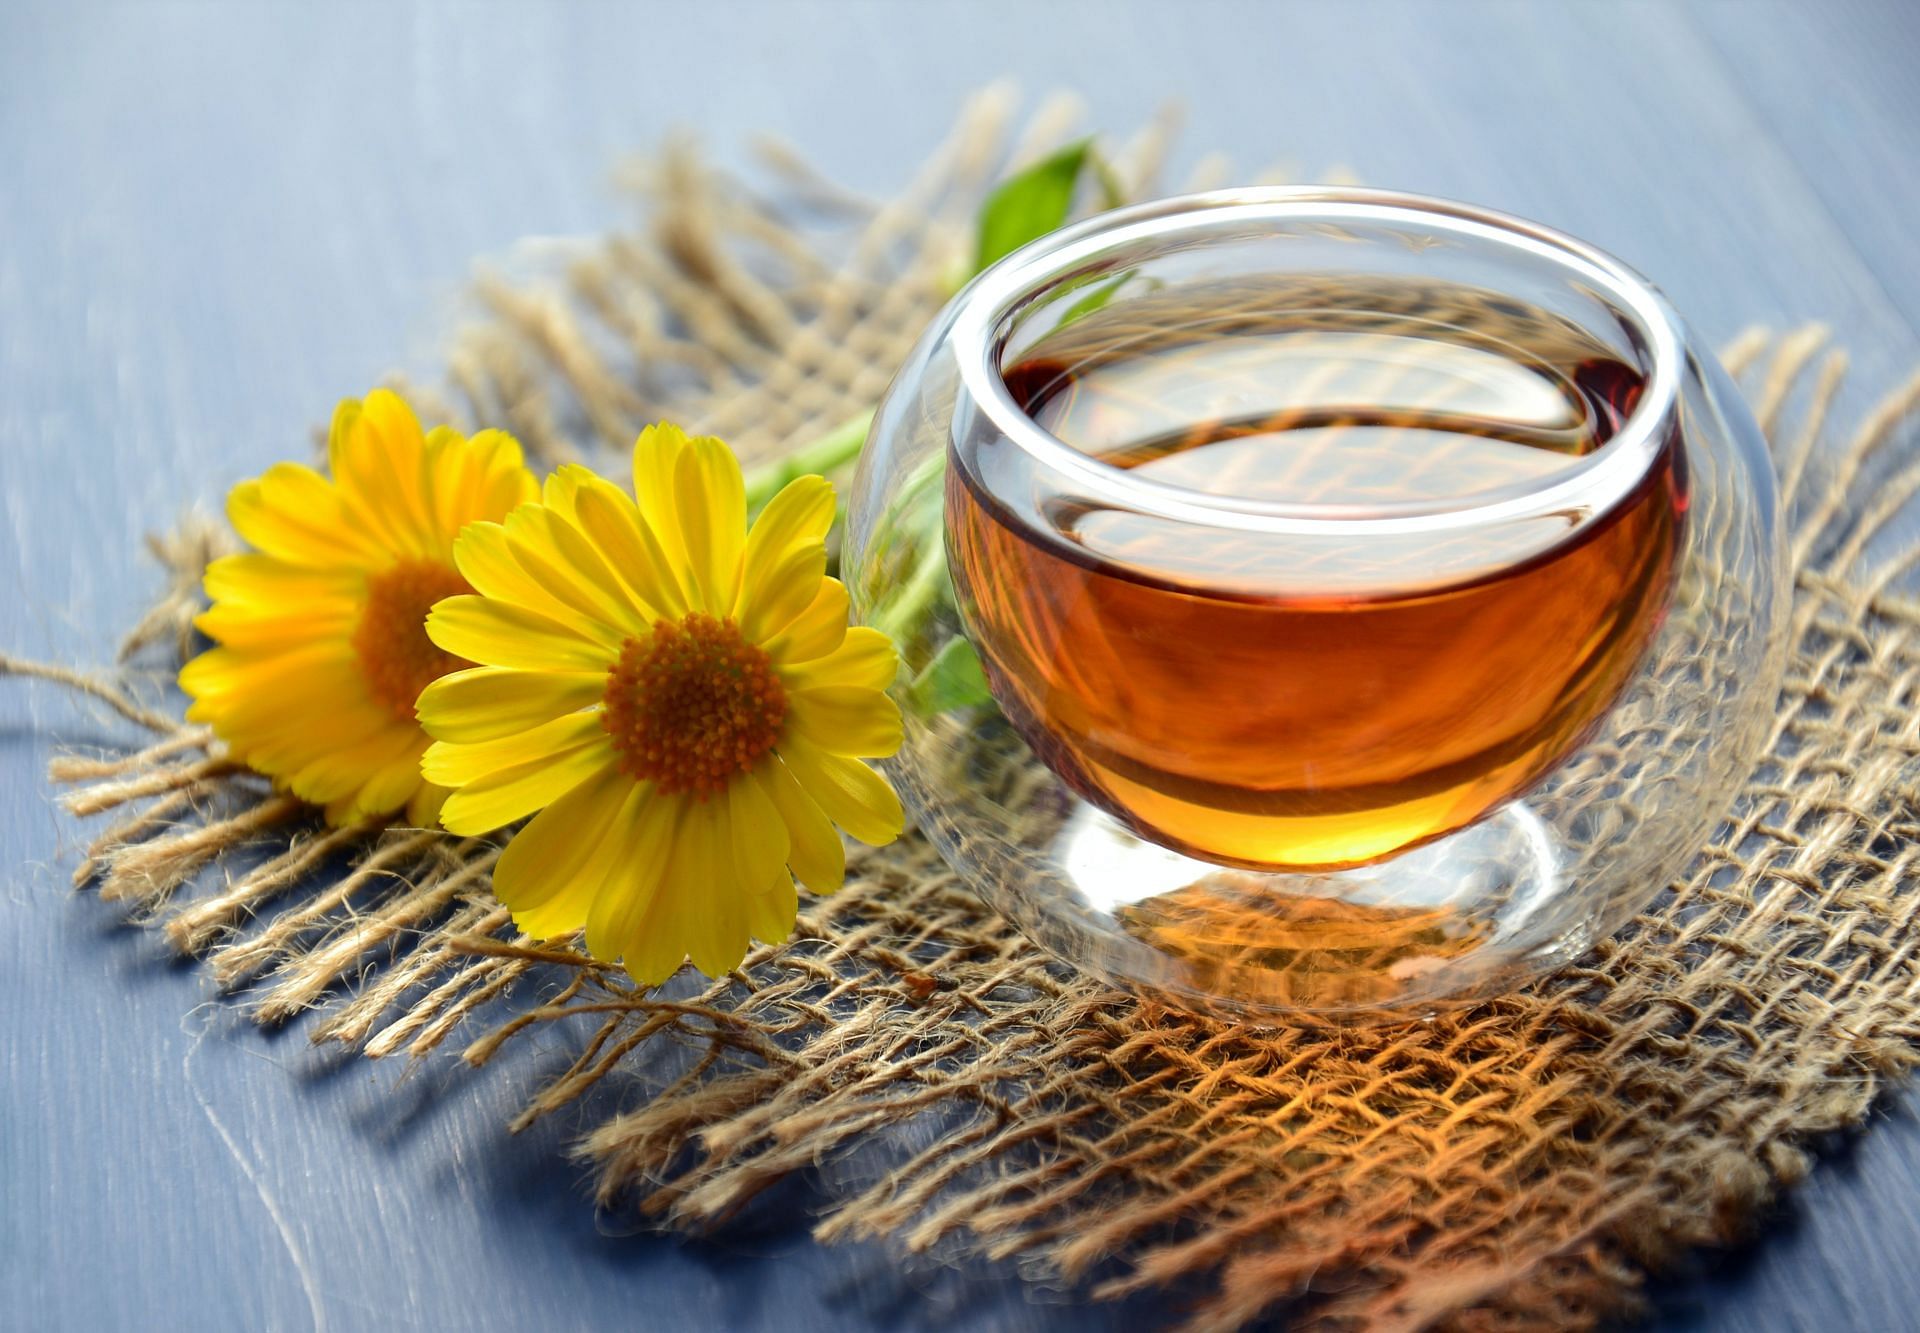 Drinking chamomile tea can help relax muscles. (Image via Pexels/Mareefe)